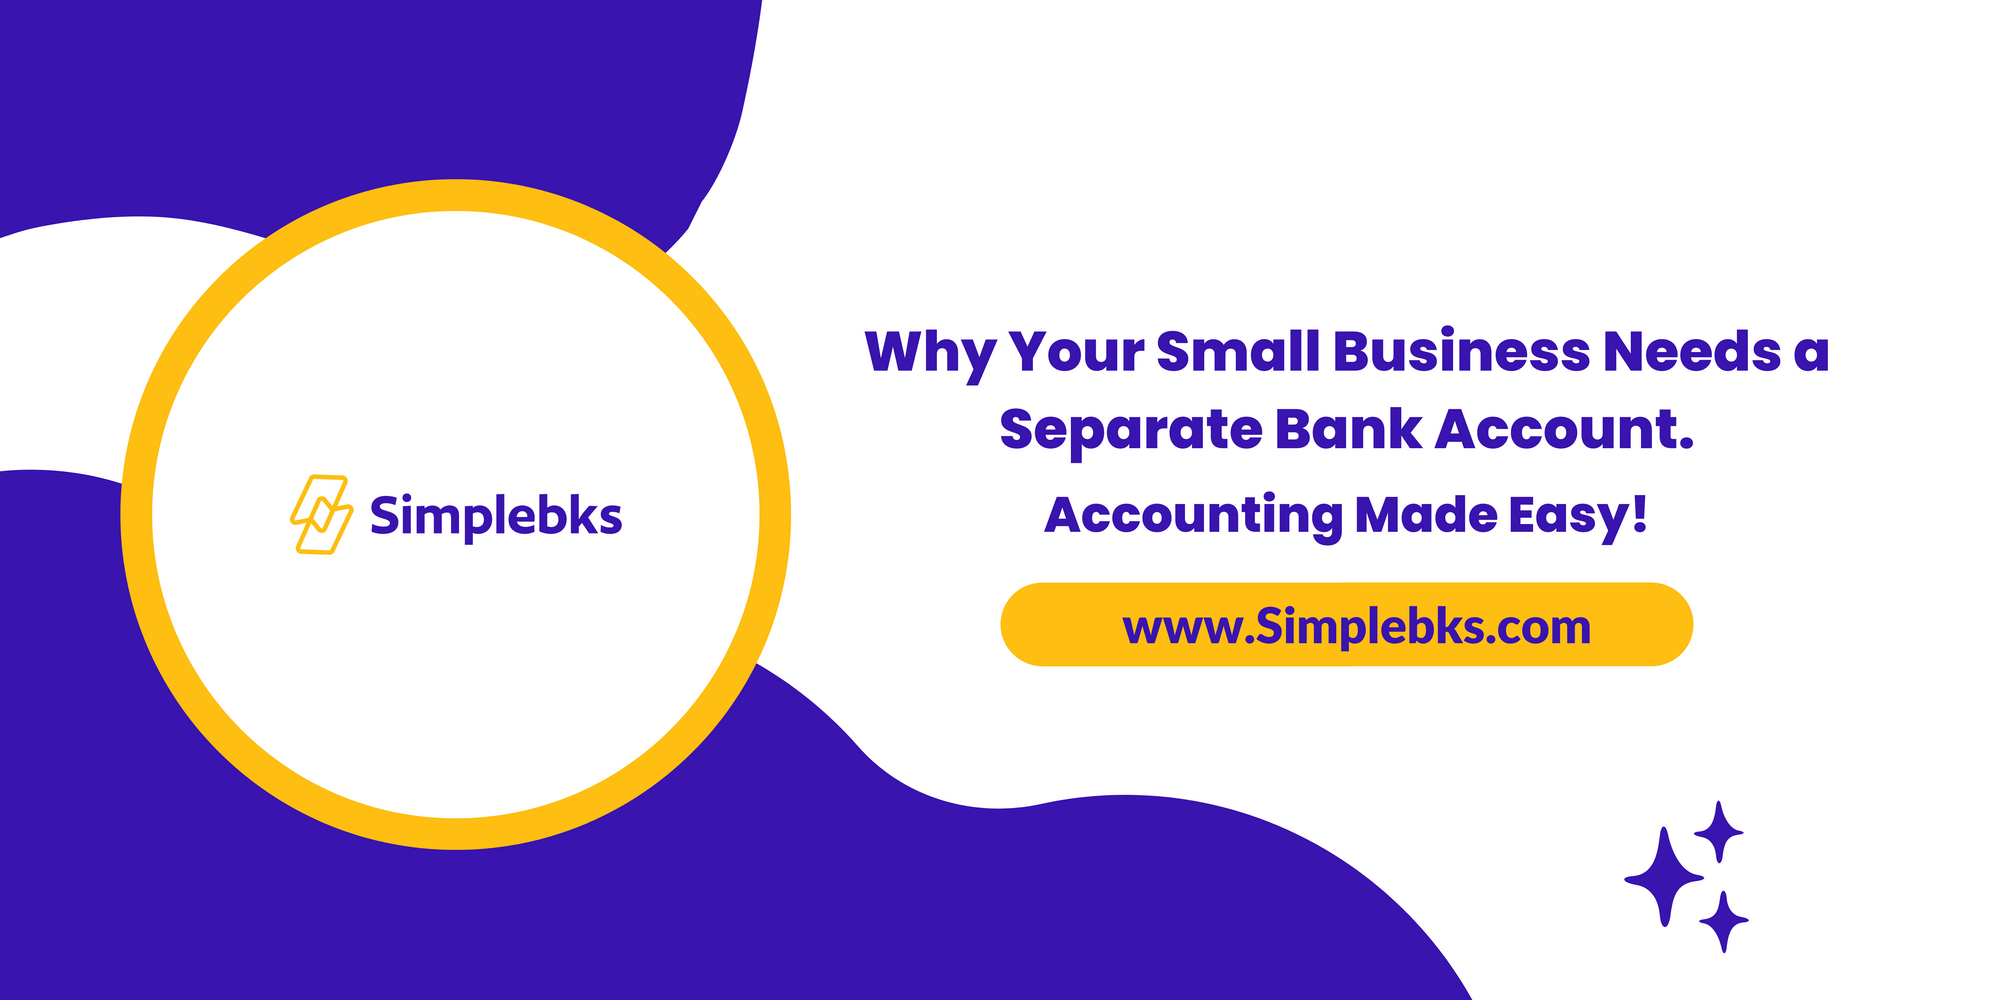 Why Your Small Business Needs a Separate Bank Account.